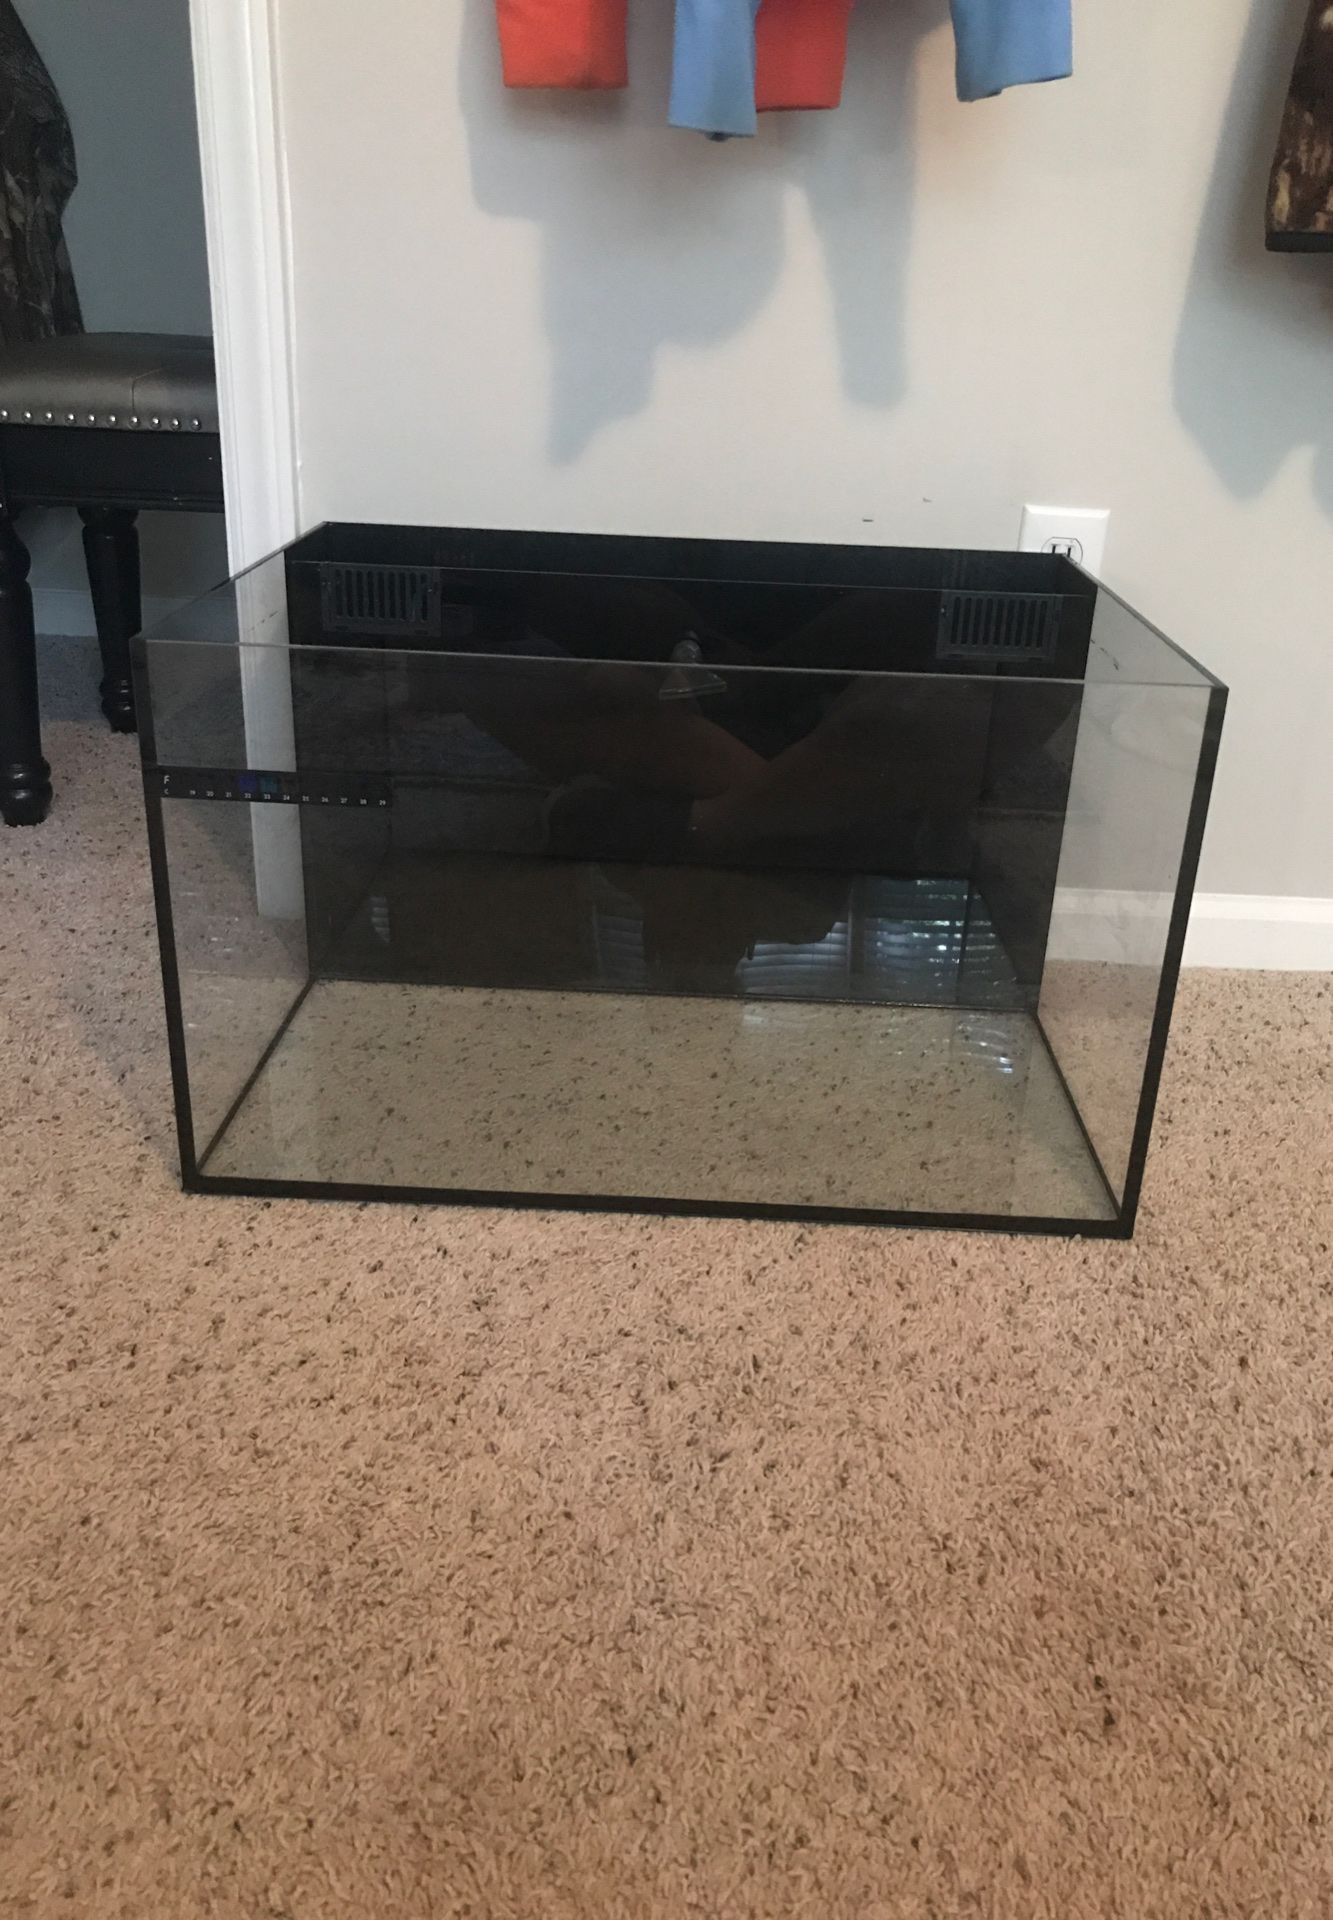 Aquarium with sump tank attached (18 gallons)